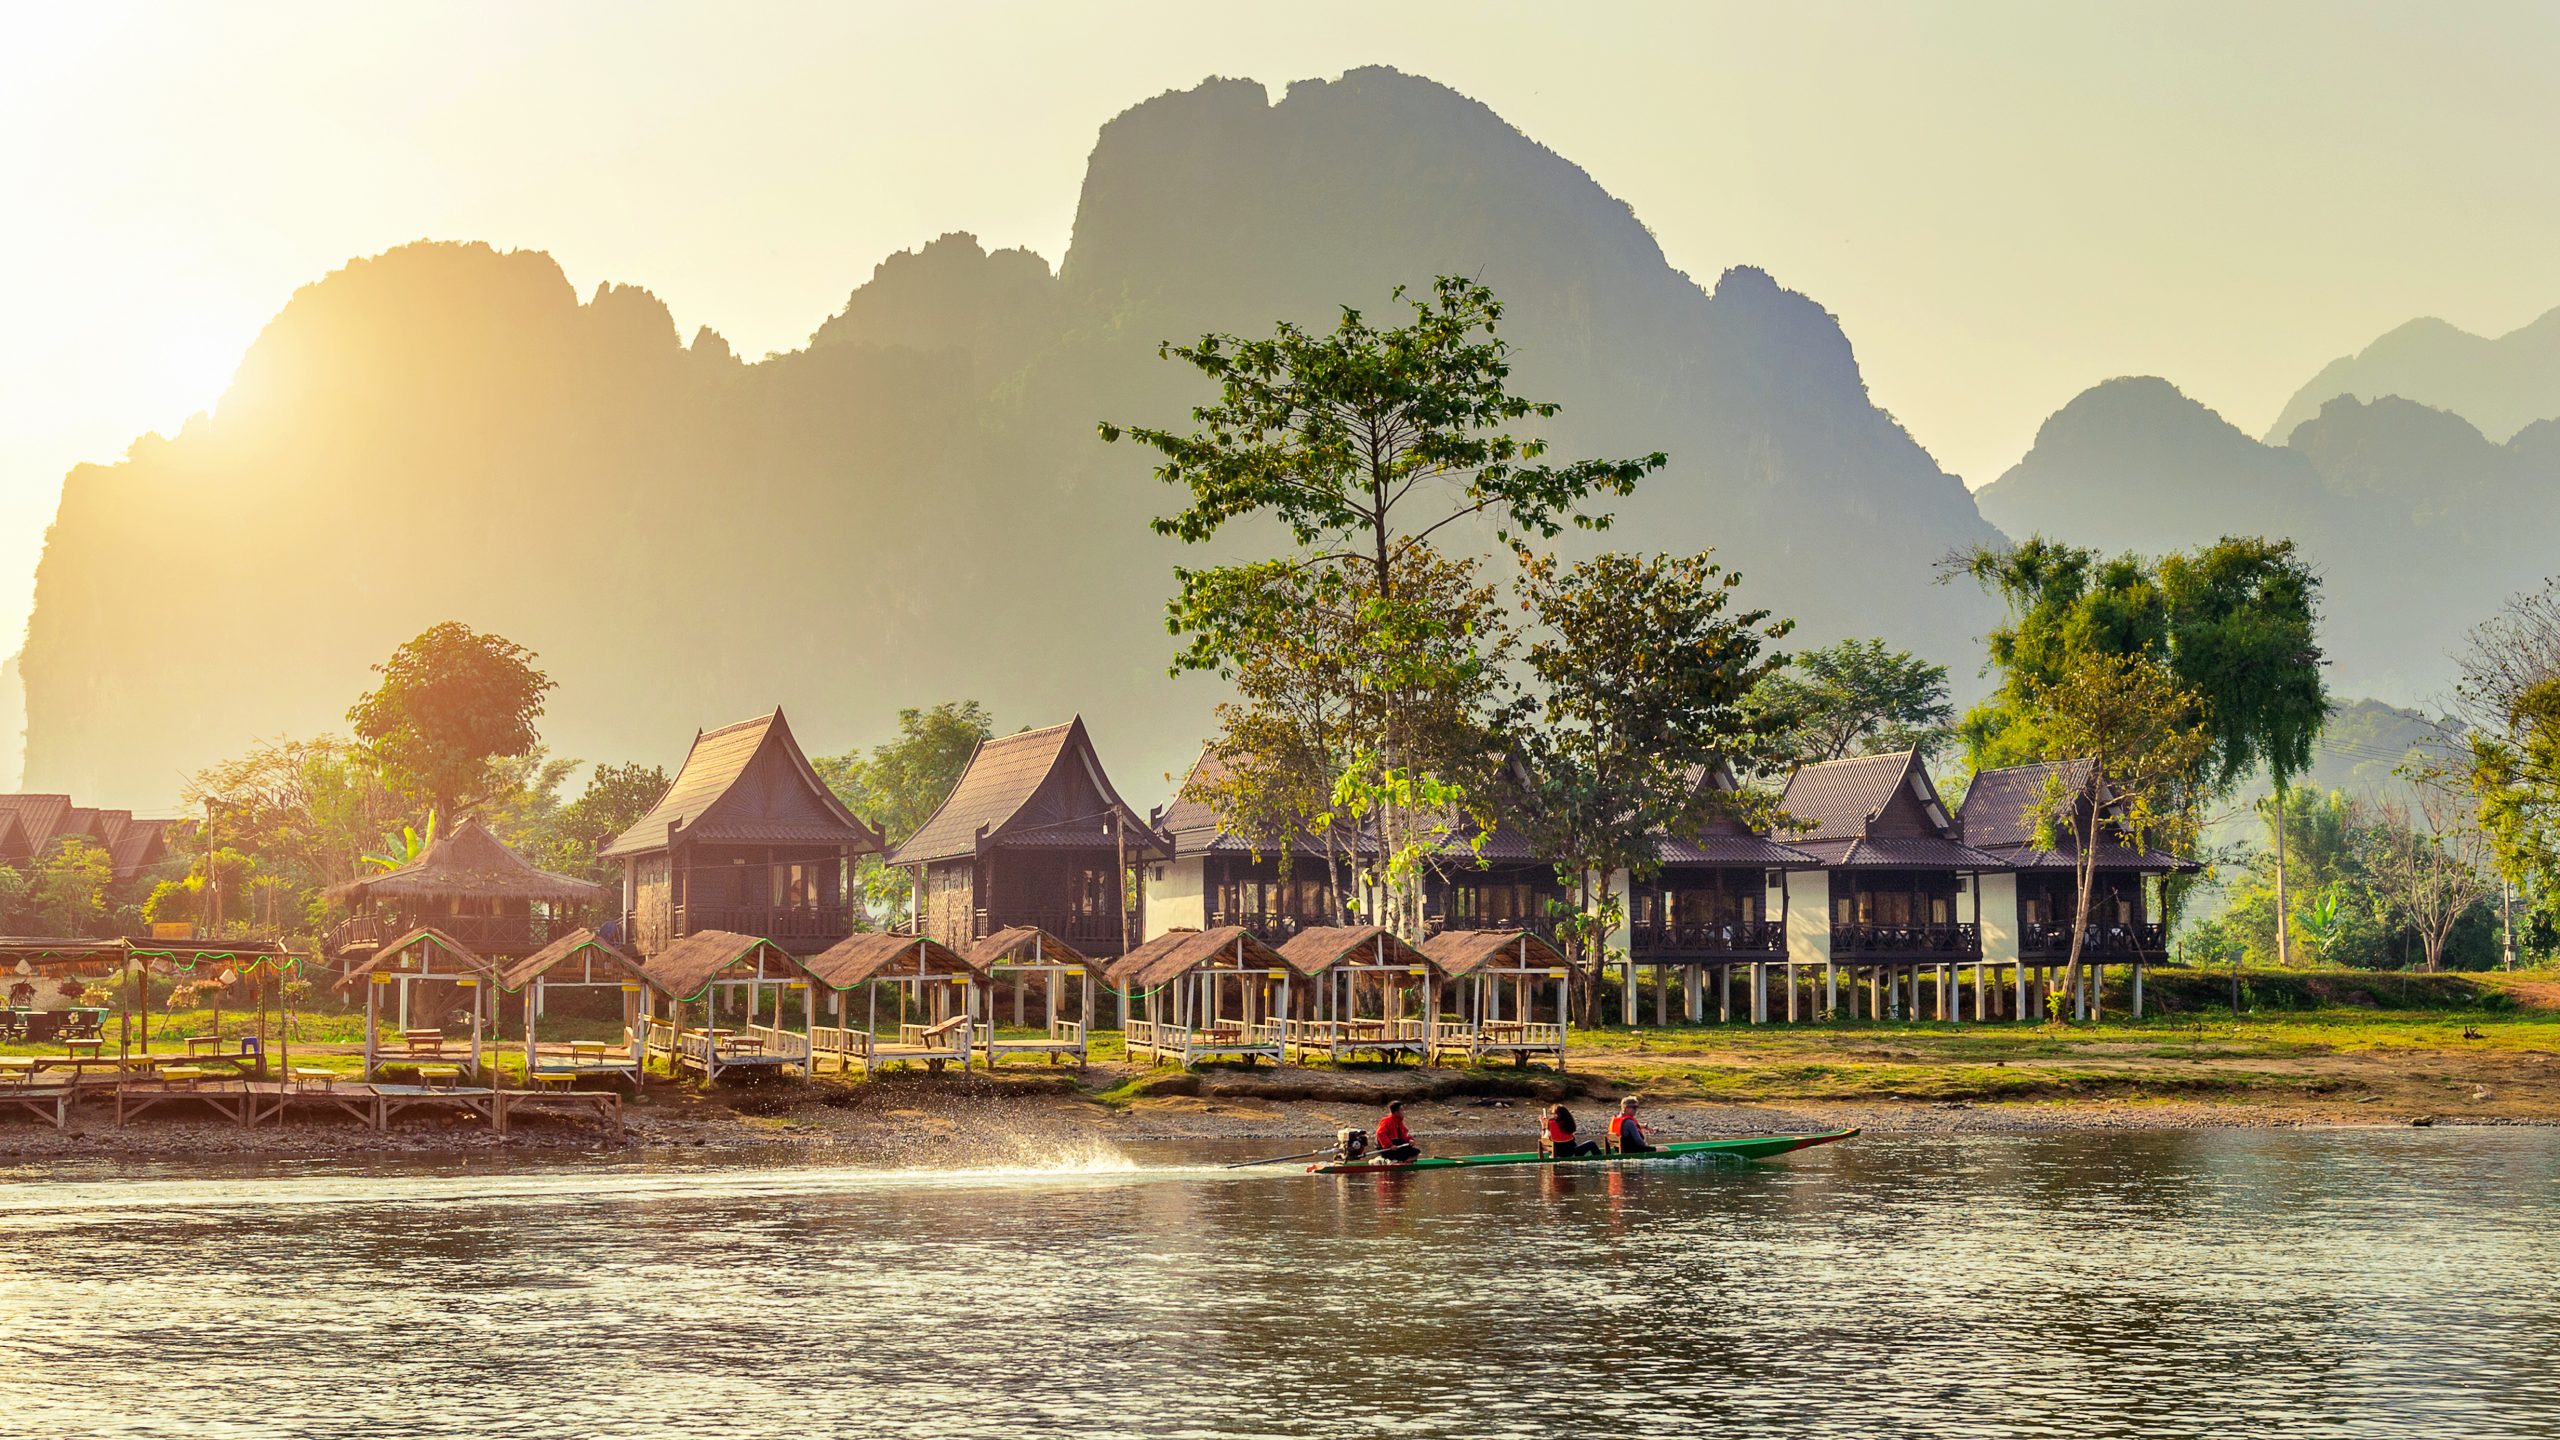 Village and bungalows along Nam Song River in Vang Vieng, Laos. - European Chamber of Commerce and Industry in Lao PDR